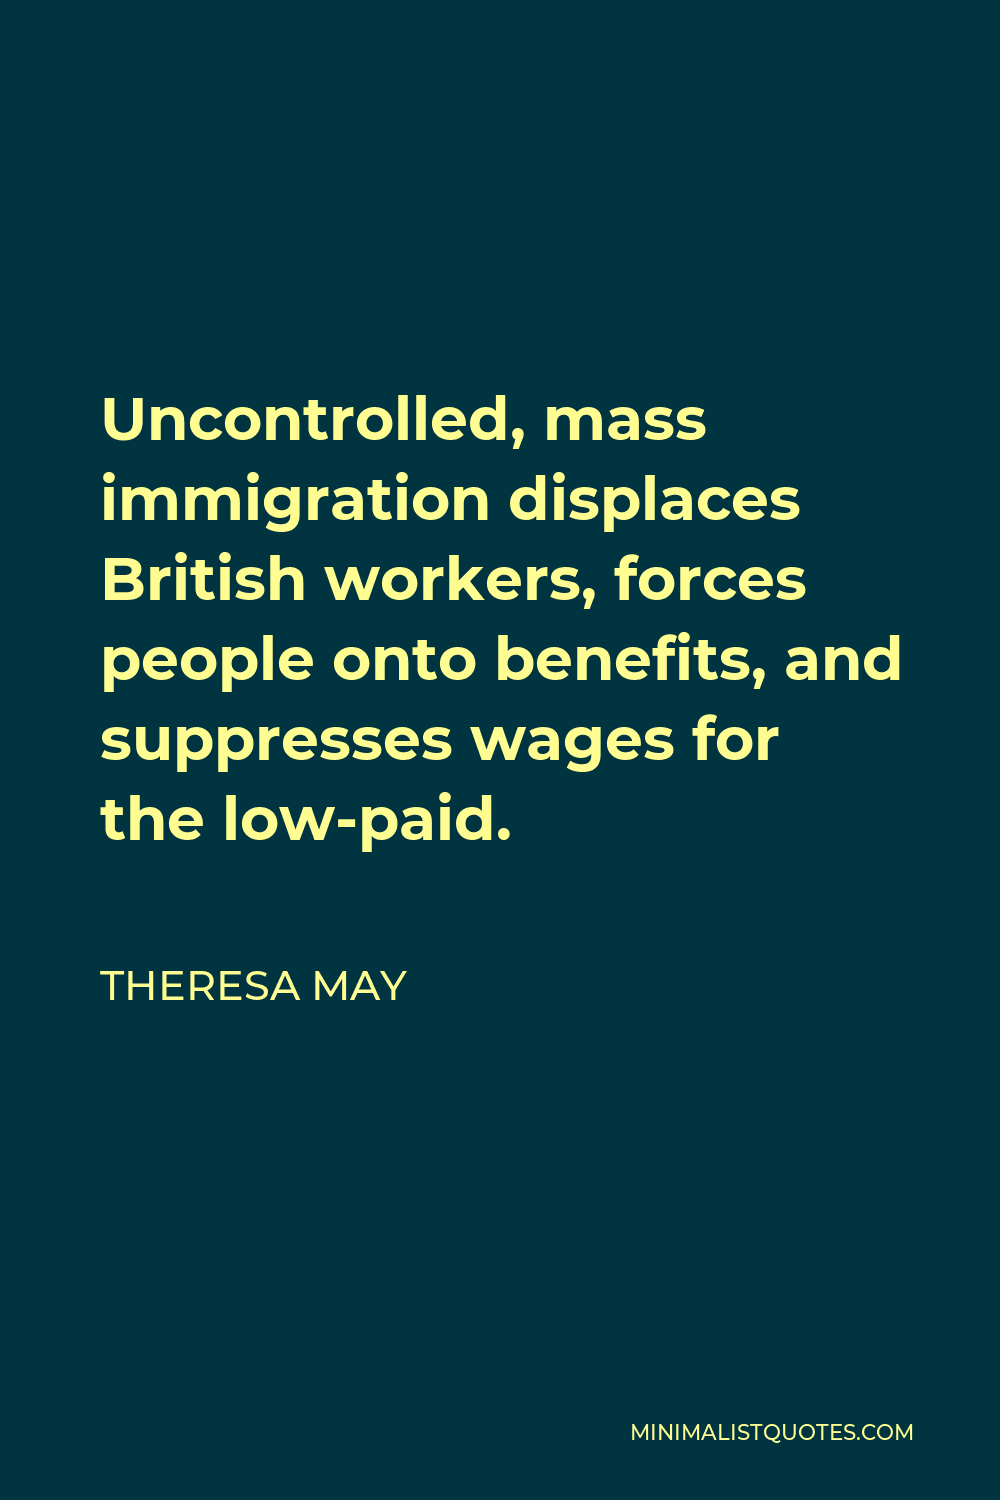 Theresa May Quote - Uncontrolled, mass immigration displaces British workers, forces people onto benefits, and suppresses wages for the low-paid.